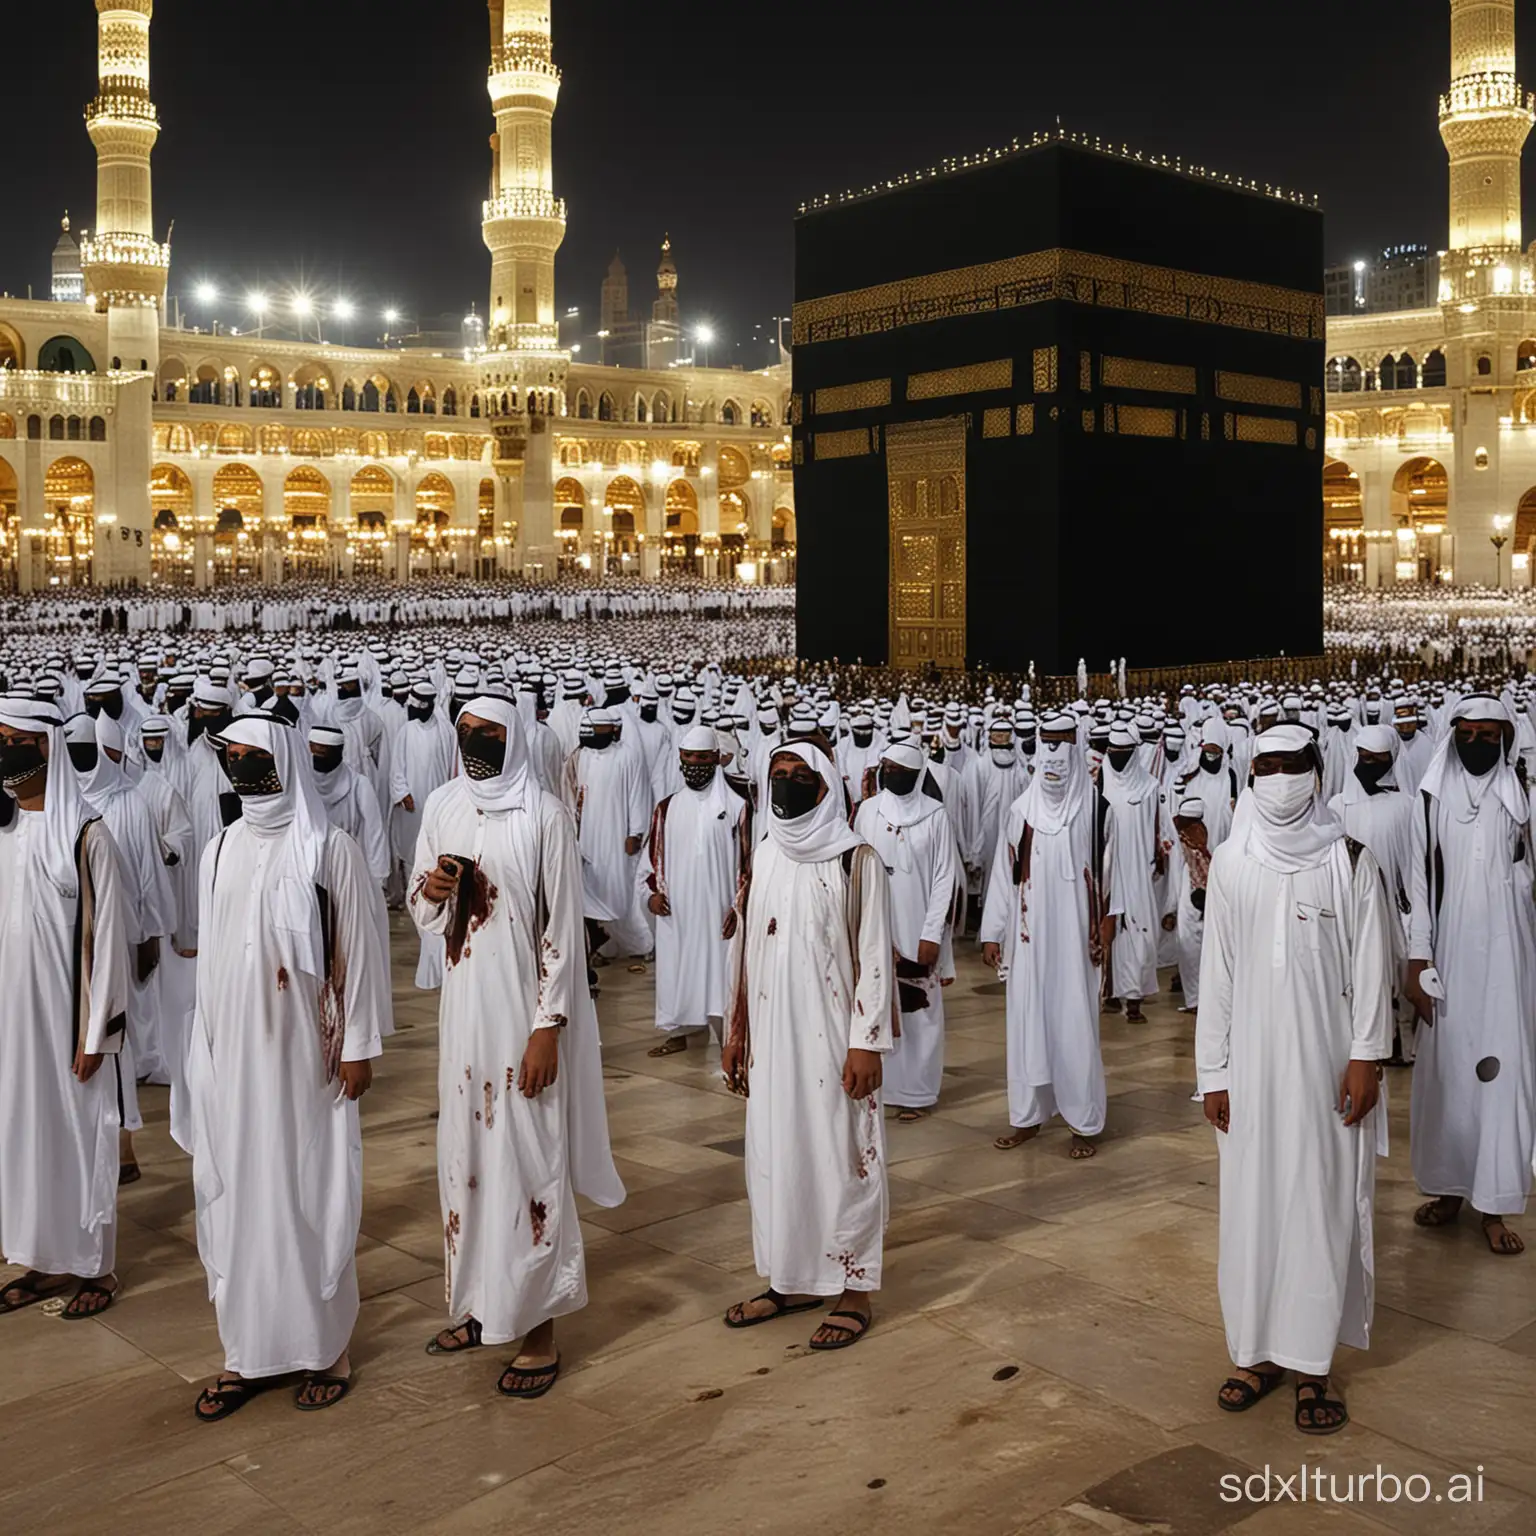 Arab-Zombies-Gather-at-Kaaba-in-Mecca-City